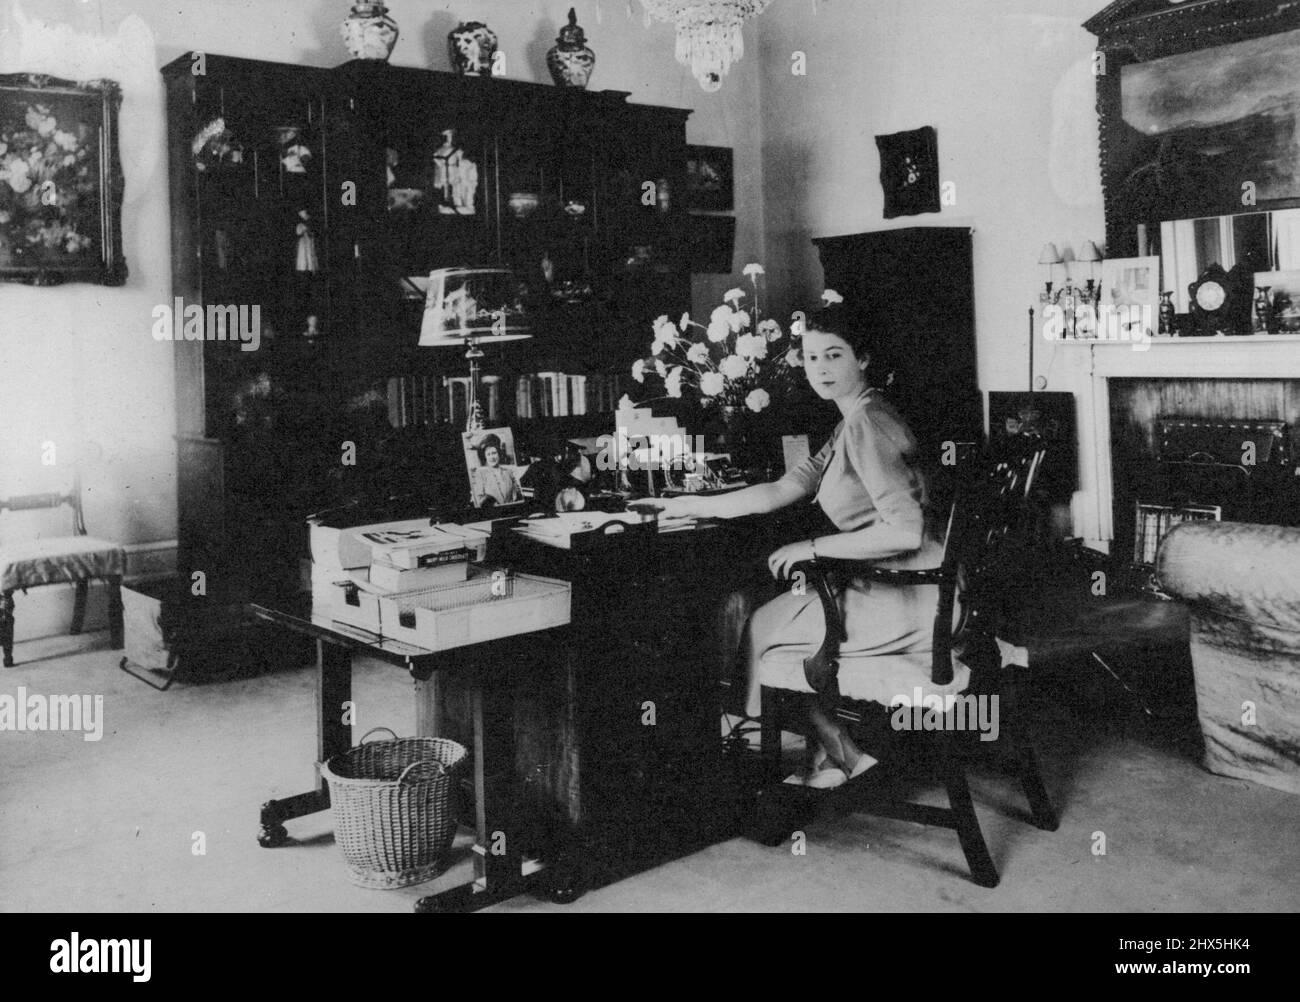 Britain's Princesses At Home In Buckingham Palace -- Princess Elizabeth, who is heir to the throne, settles down to some serious work at her desk. Seen among the businesslike desk equipment is a portrait of the Queen. These intimate pictures show Princess Elizabeth and her younger sister, Princess Margaret, in the privacy of their own room at Buckingham Palace, London. Daughters of King George and Queen Elizabeth, Princess Elizabeth is now 21 and Princess Margaret is 16. Their room, with windows looking out on the Queen Victoria Memorial, provides an interesting glimpse into the girls' Stock Photo